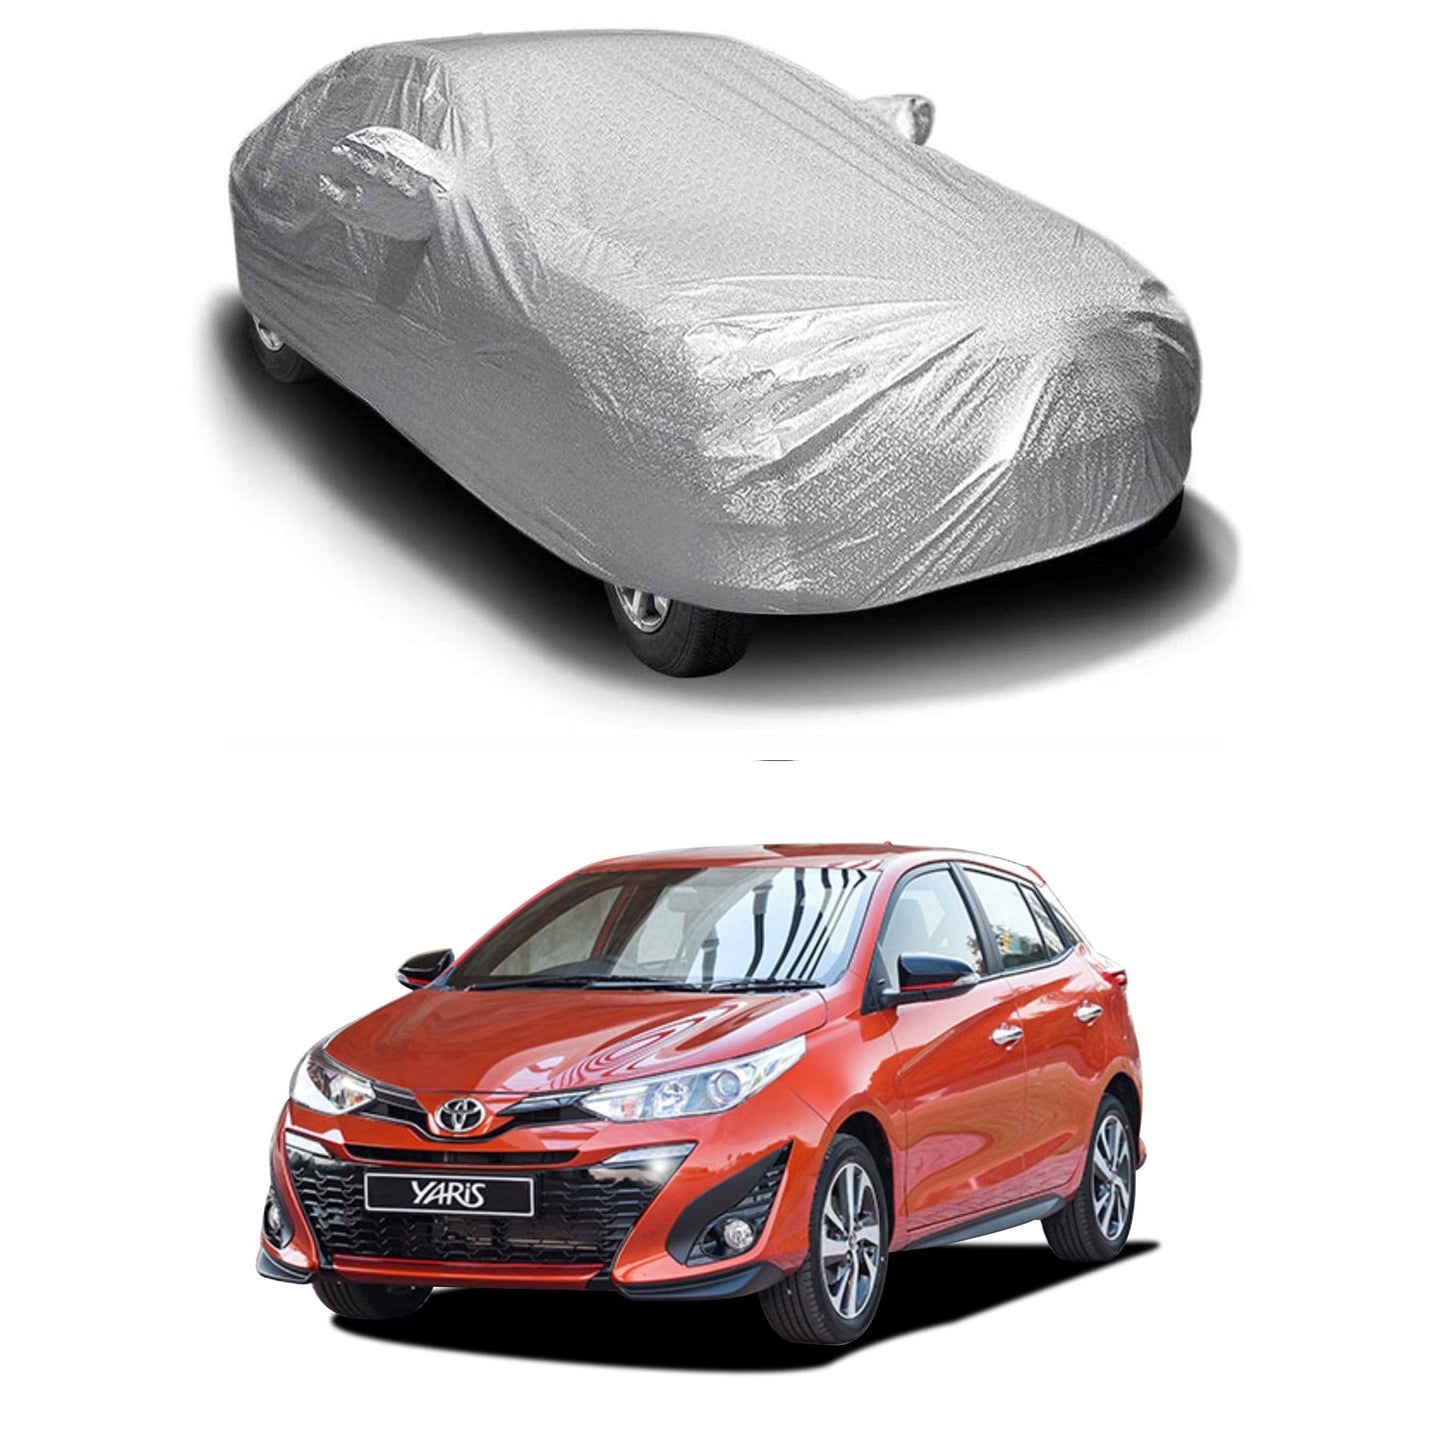 Oshotto Spyro Silver Anti Reflective, dustproof and Water Proof Car Body Cover with Mirror Pockets For Toyota Yaris